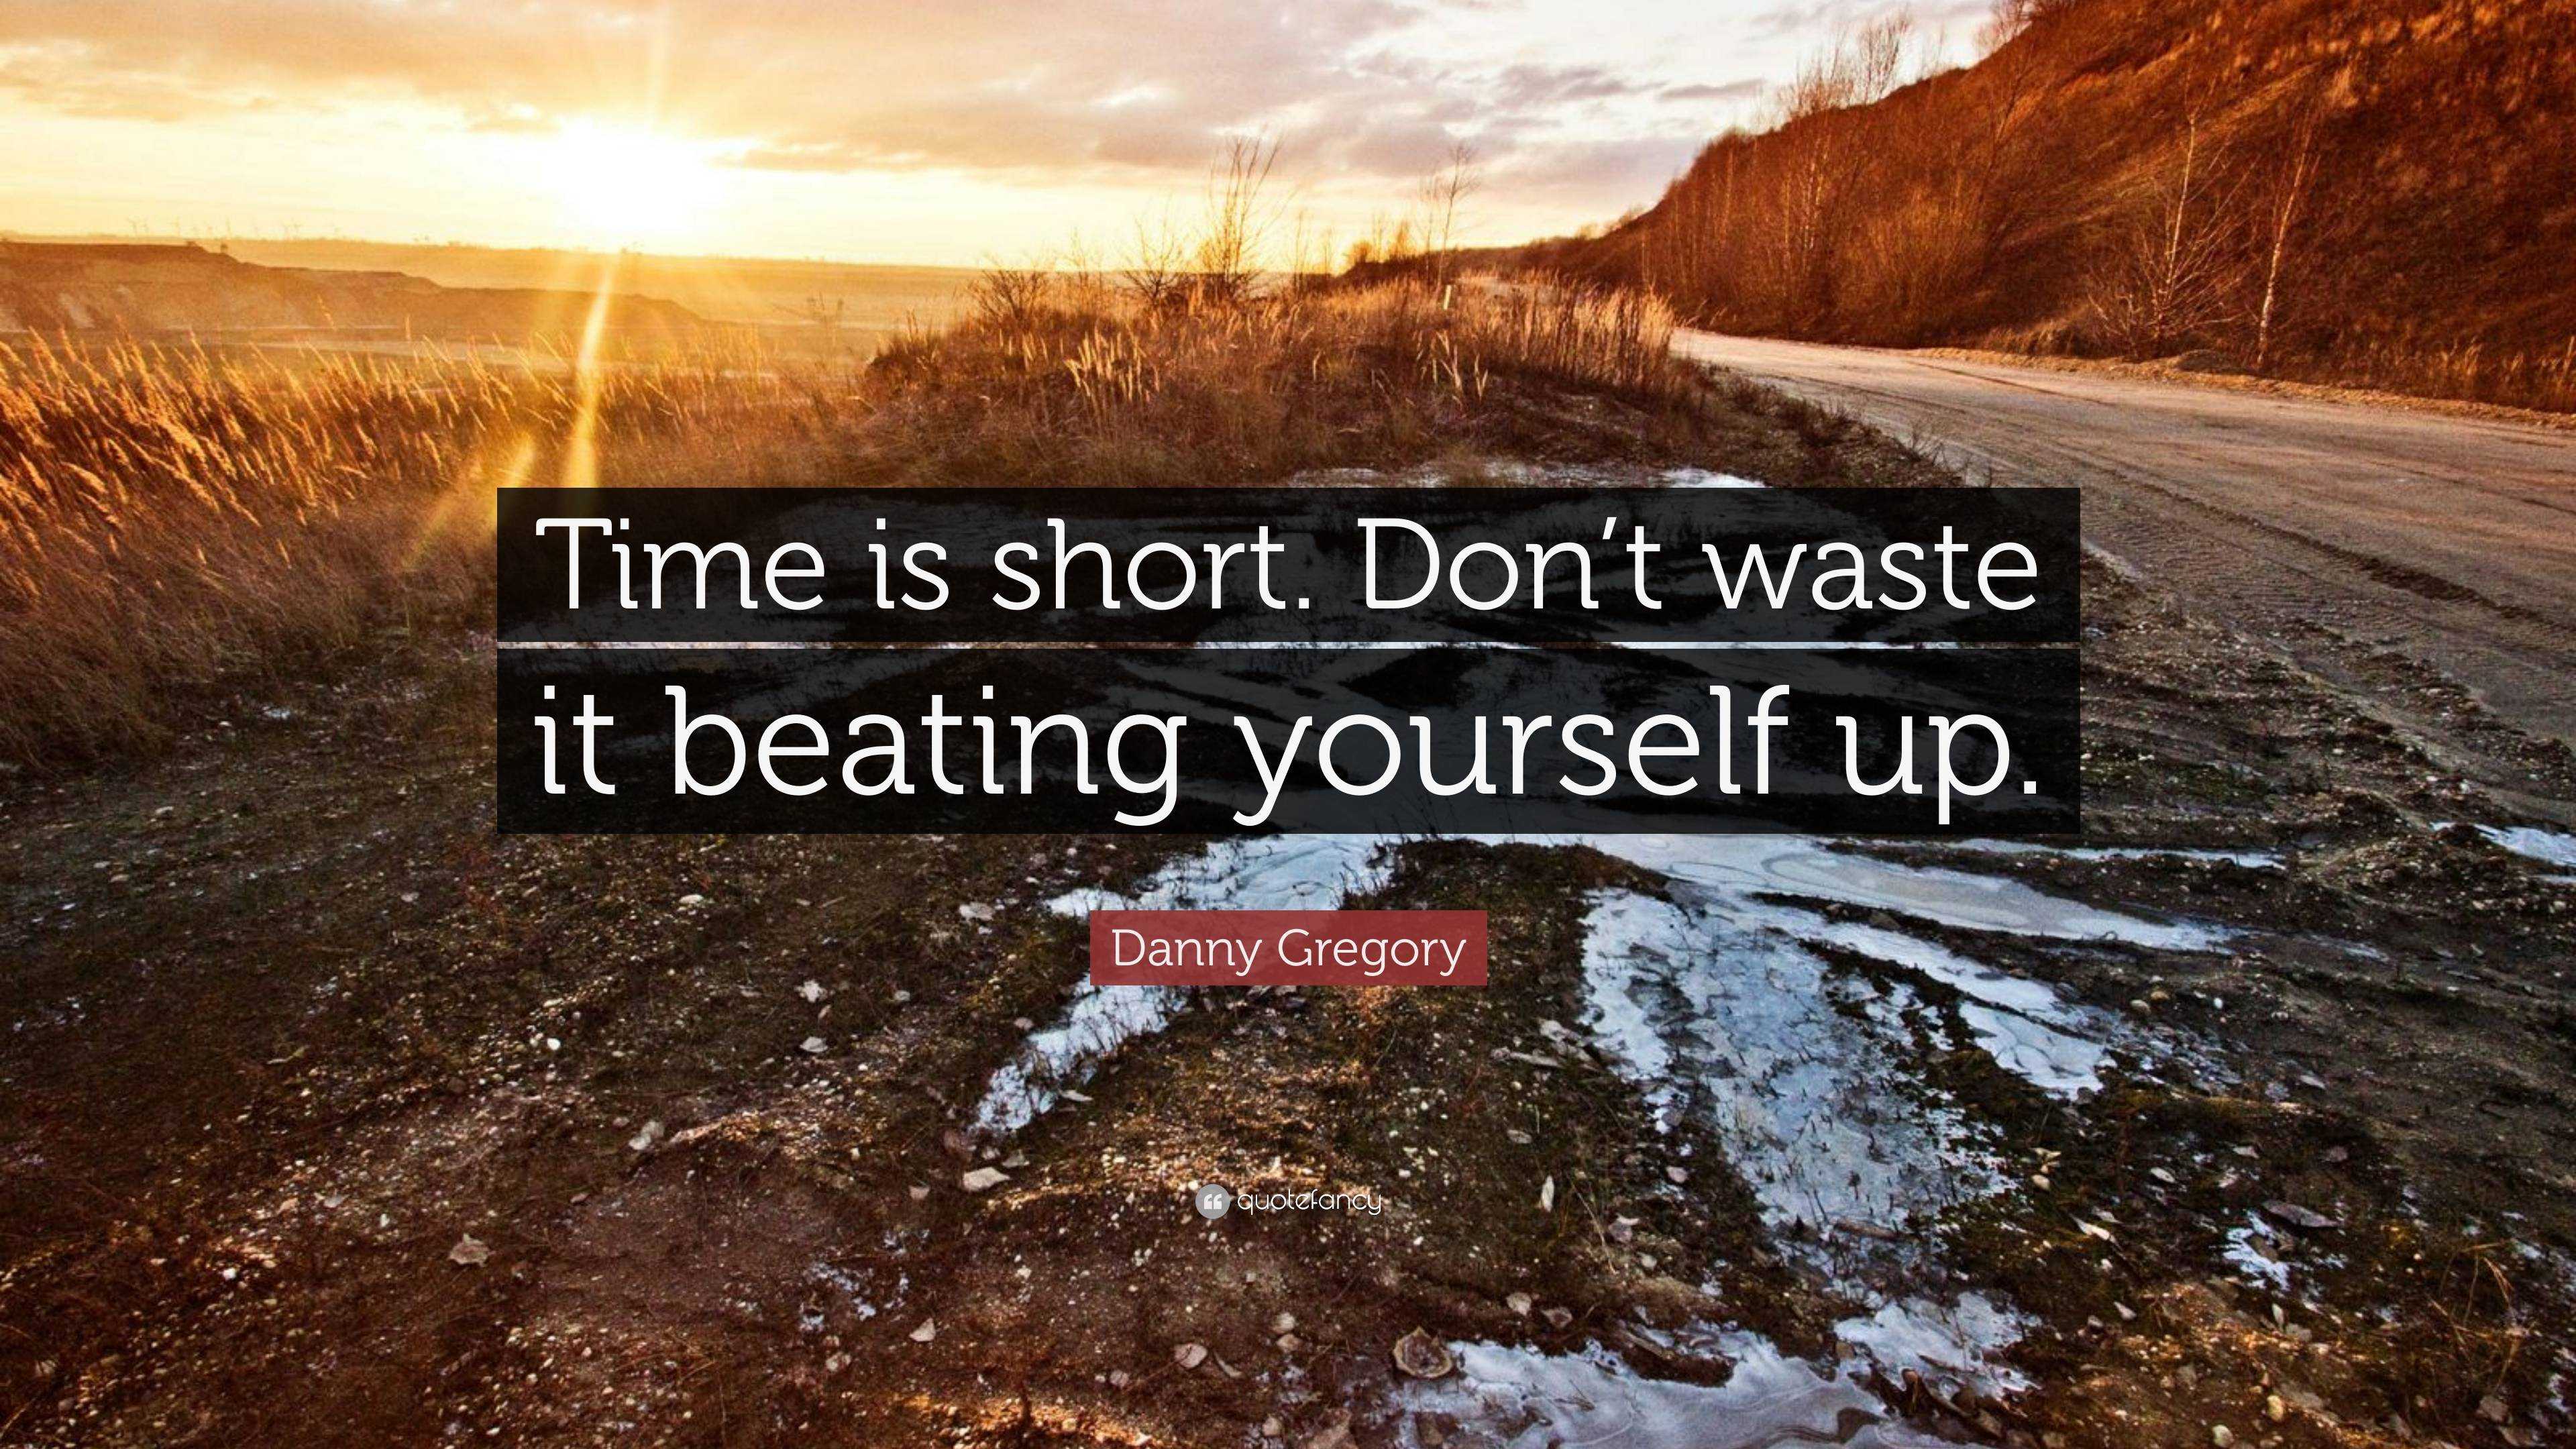 Danny Gregory Quote: “Time is short. Don’t waste it beating yourself up.”